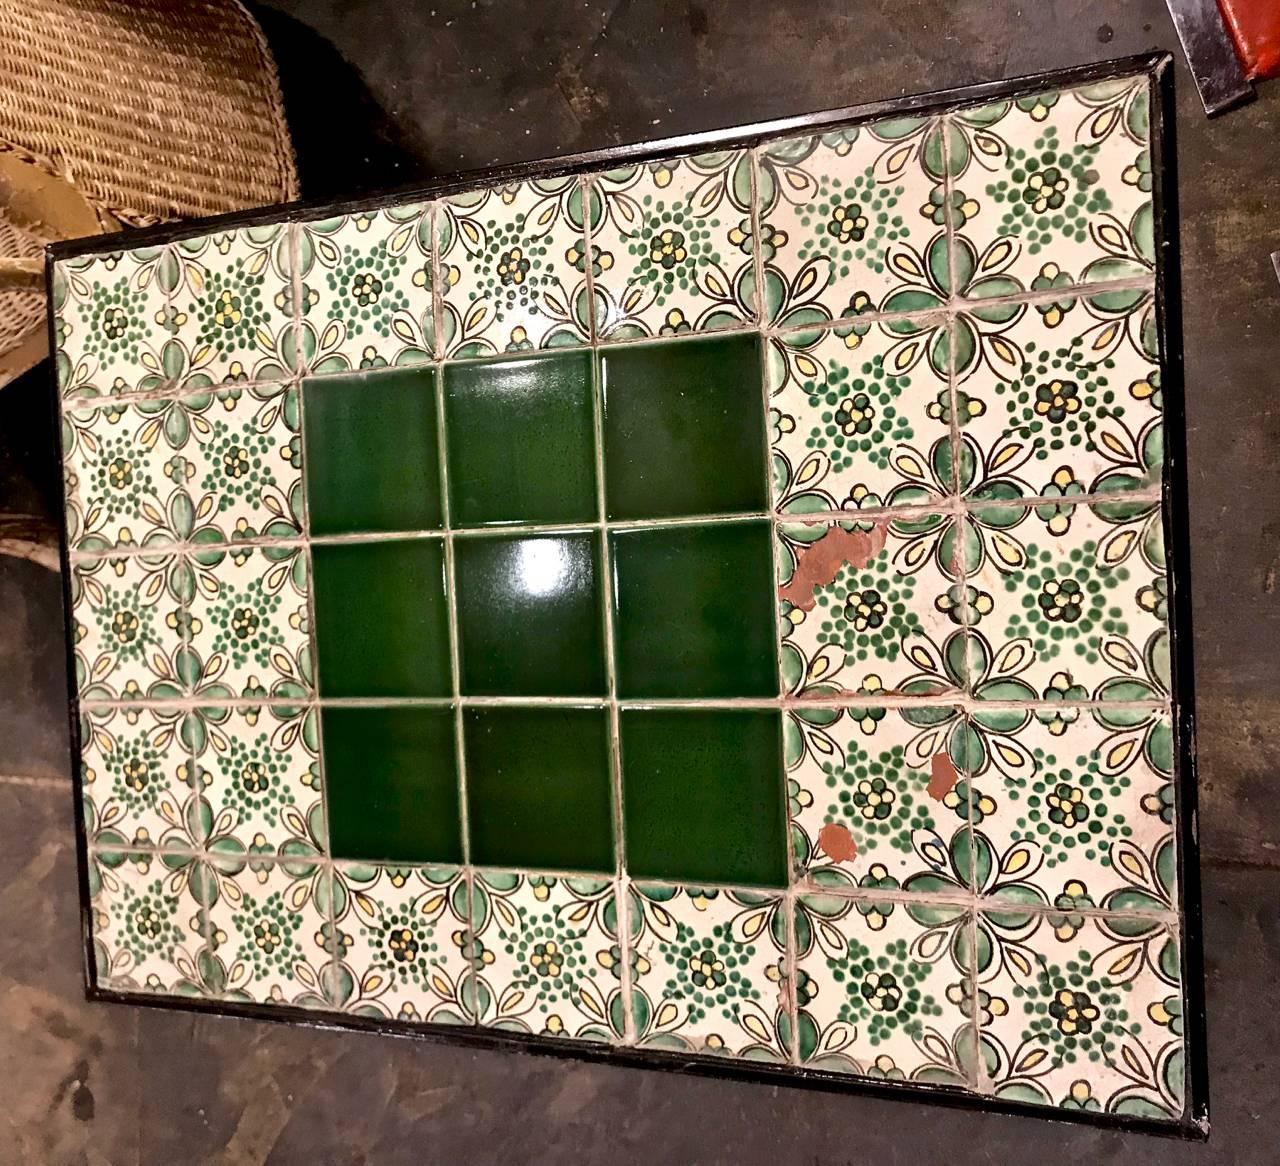 This is an early 20th century heavy wrought iron occasional table whose top is composed of antique Portuguese or Spanish tiles. This would make an unusual cocktail or side table. All elements are in very good condition.